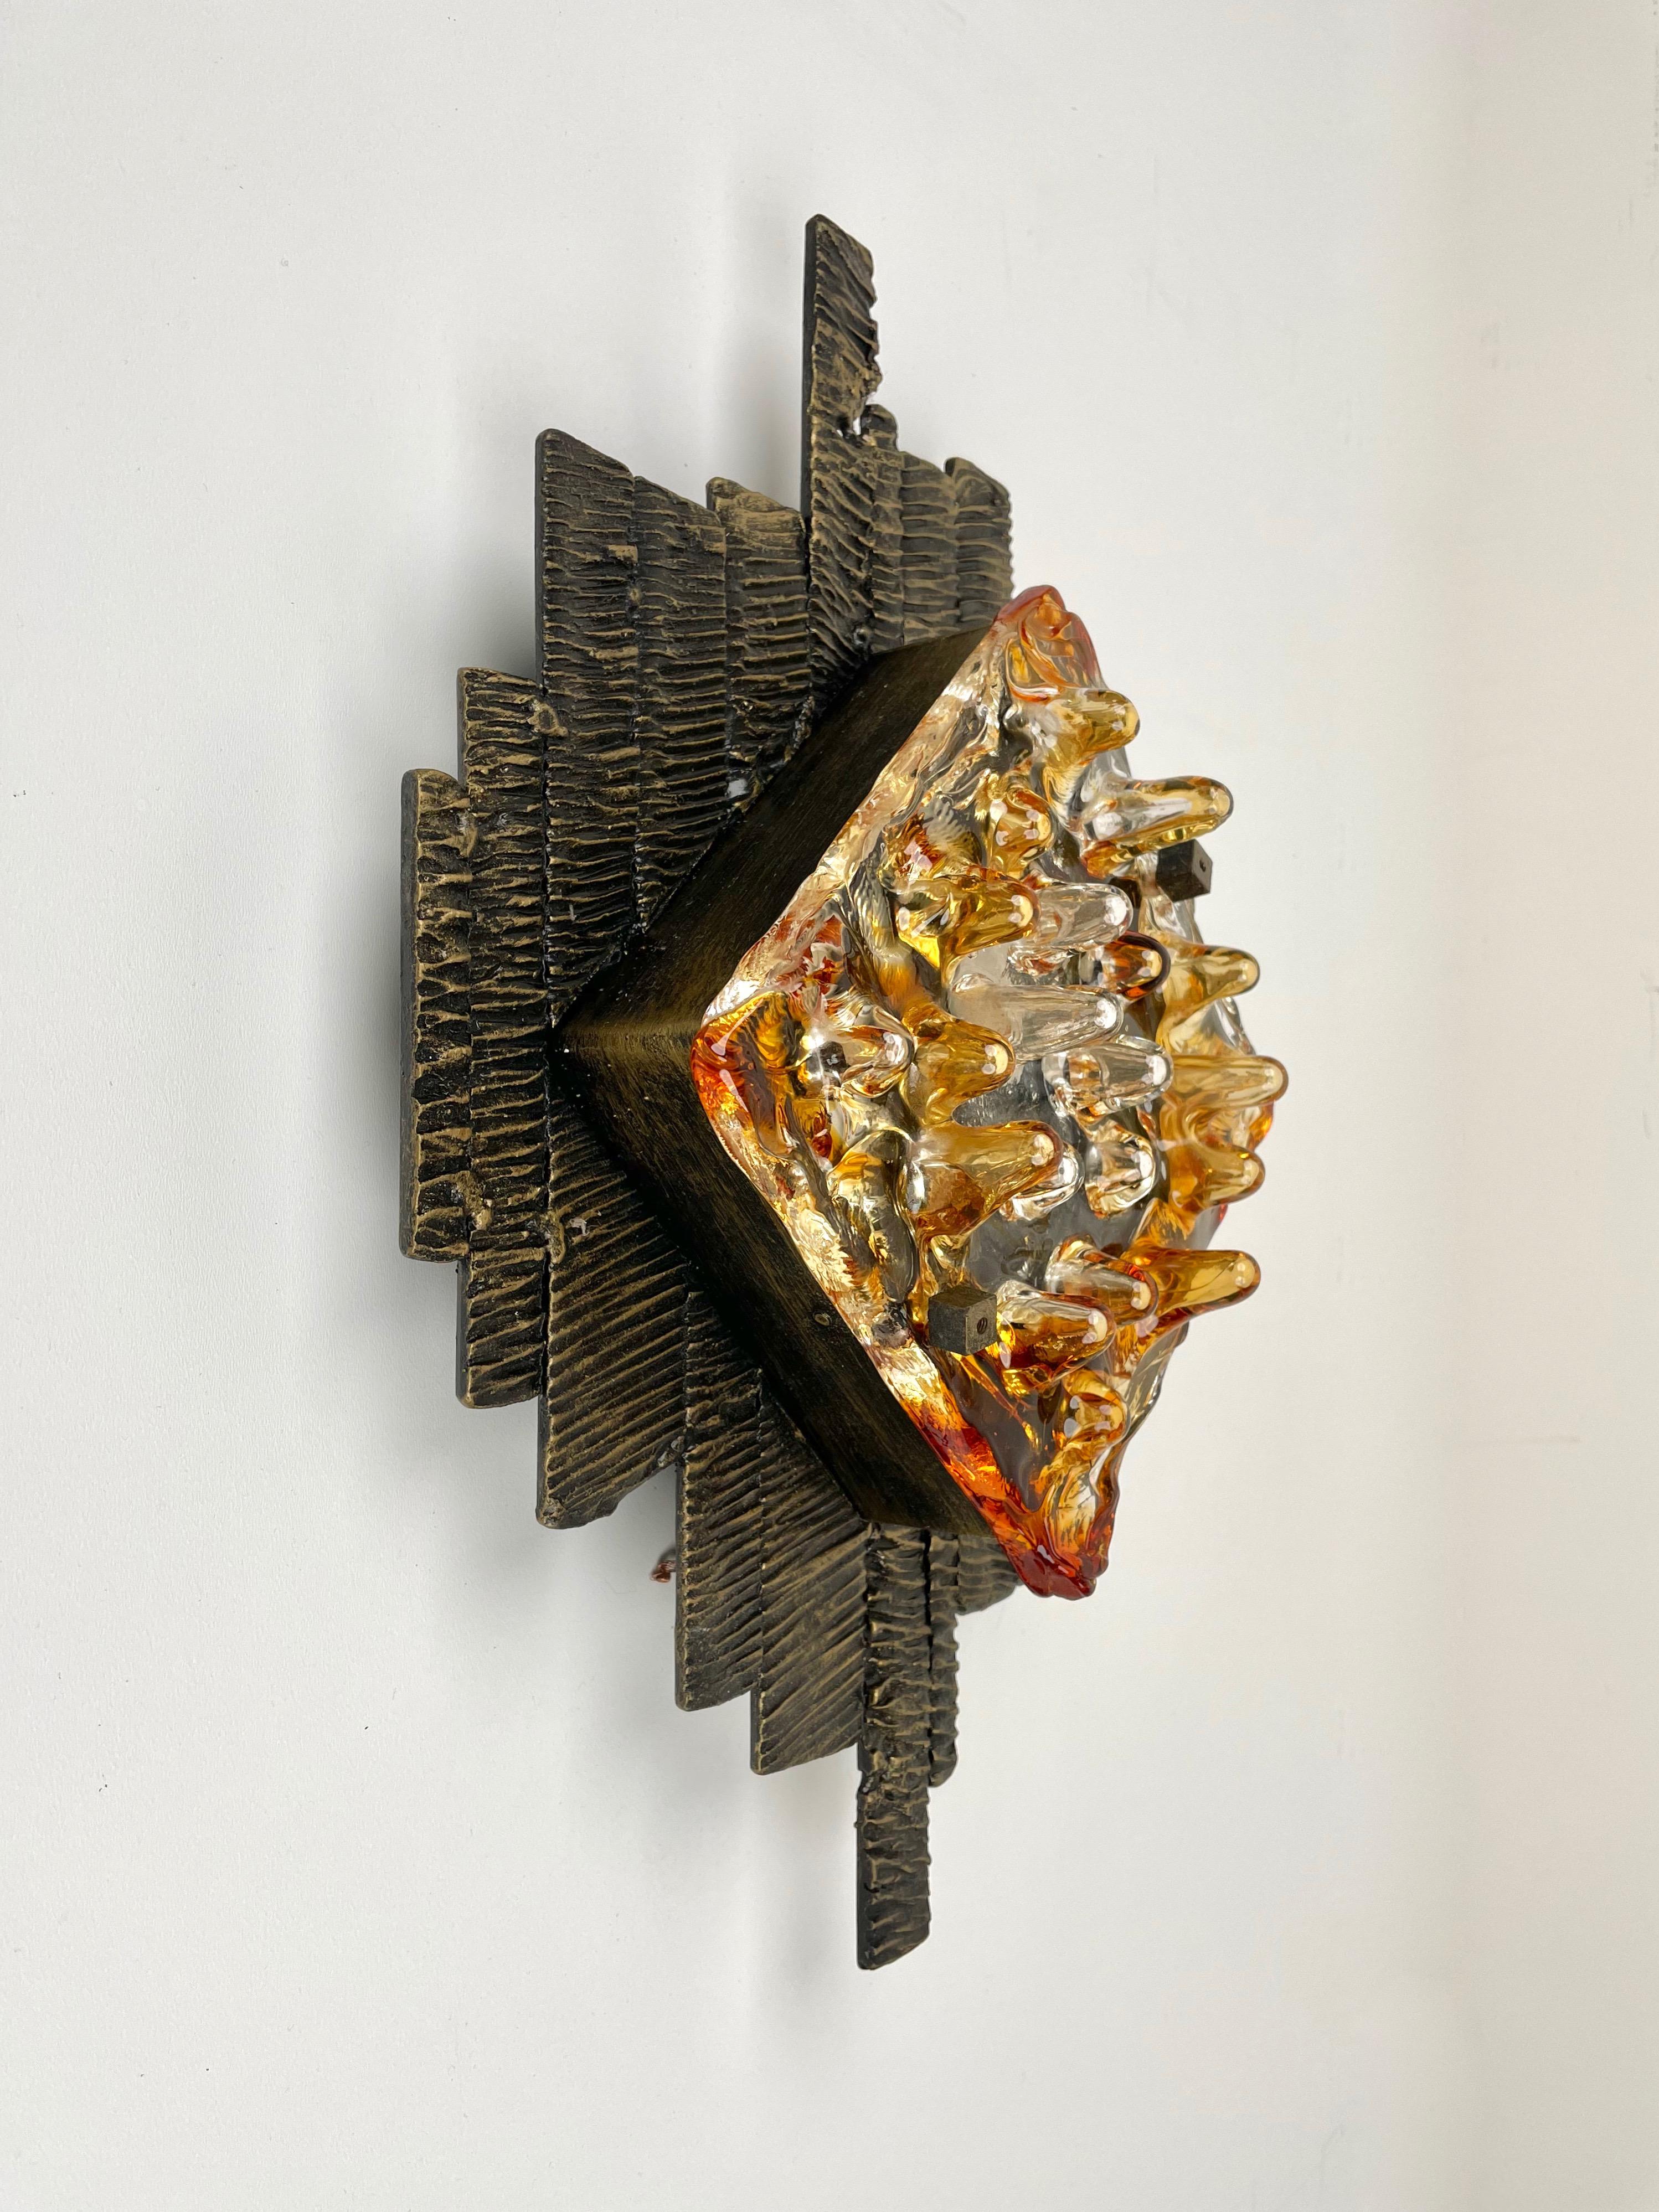 Brutalist Mid-Century Modern vintage sconce applique by Tom Ahlström and Hans Ehrlich manufactured by A & E Lights Sweden in the 1970s. 

The sconce has a heavy dark iron structure and a two-tone (transparent and amber) texture in its unique